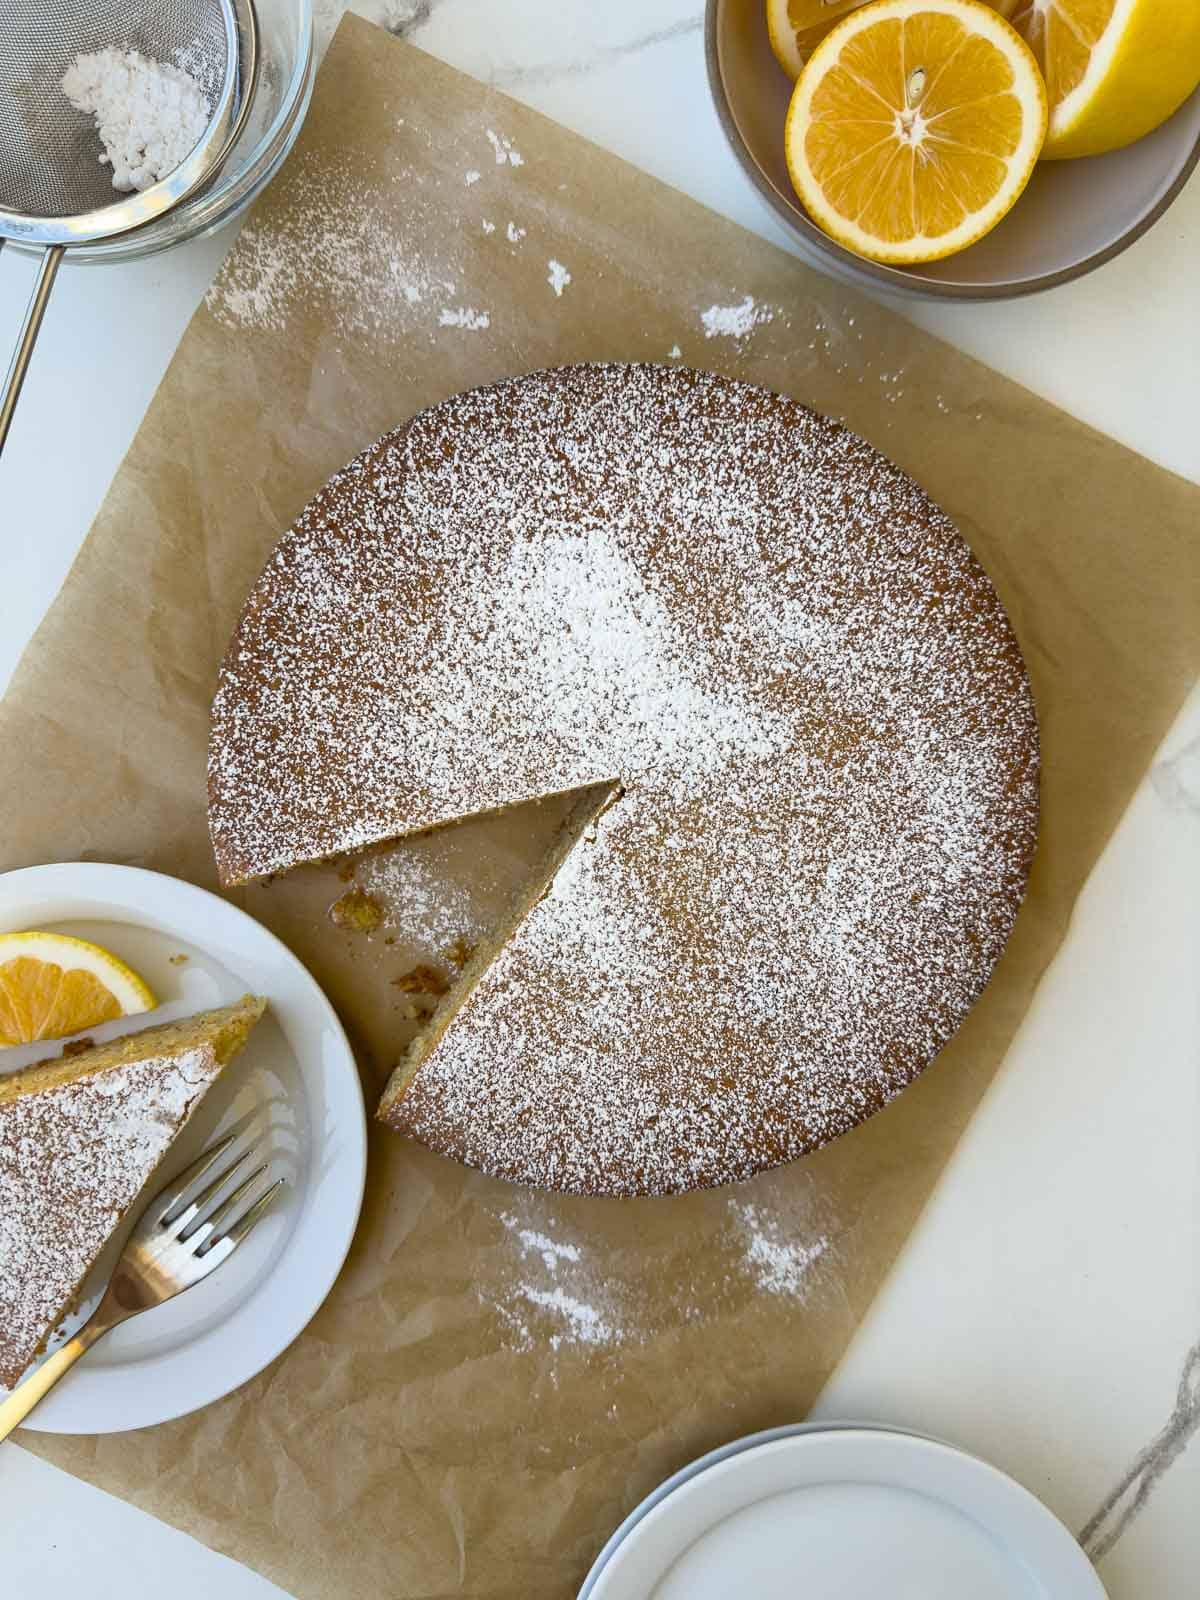 Top down view of a baked olive oil cake sifted with powdered sugar on parchment paper.
